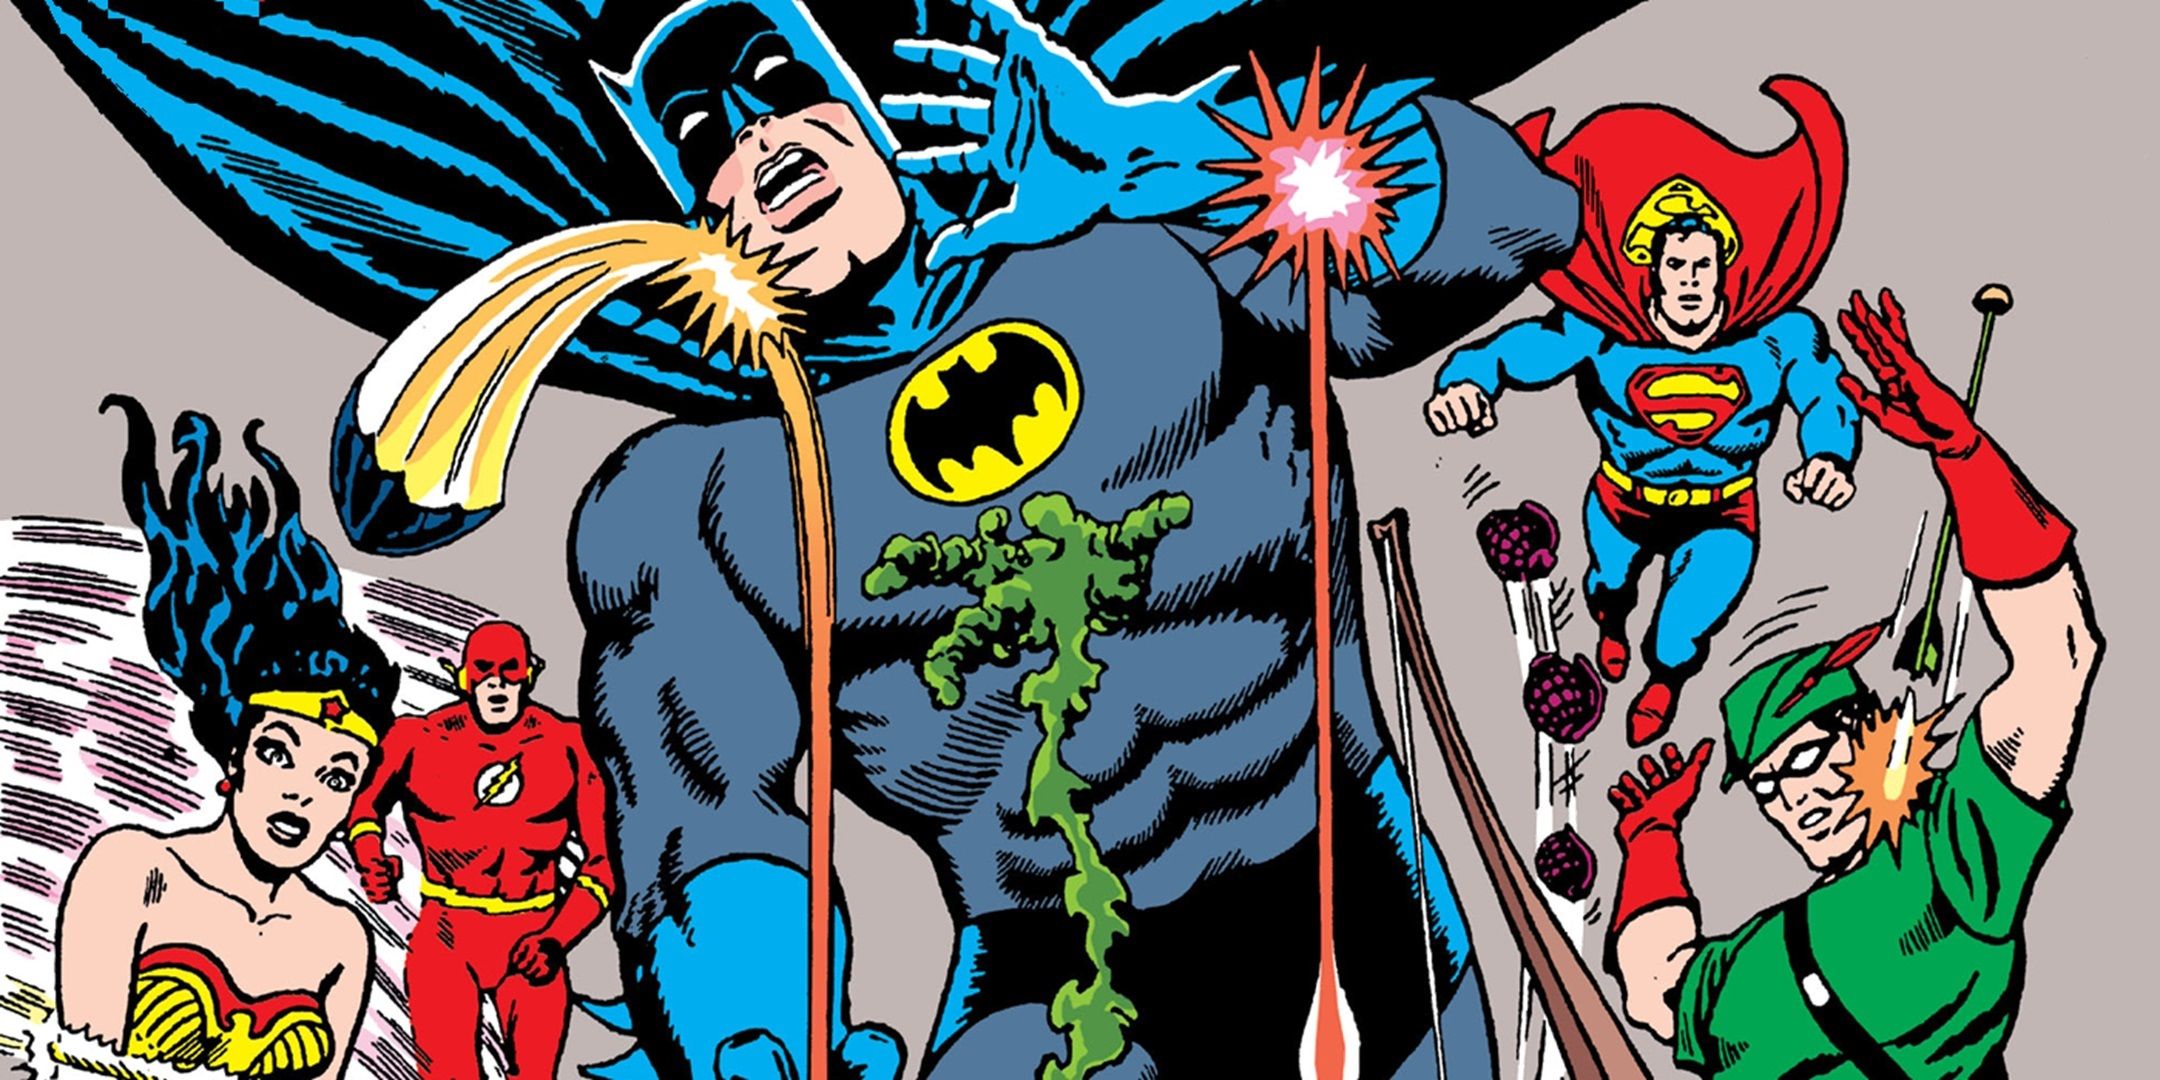 Batman and the Justice League hit by their own weapons